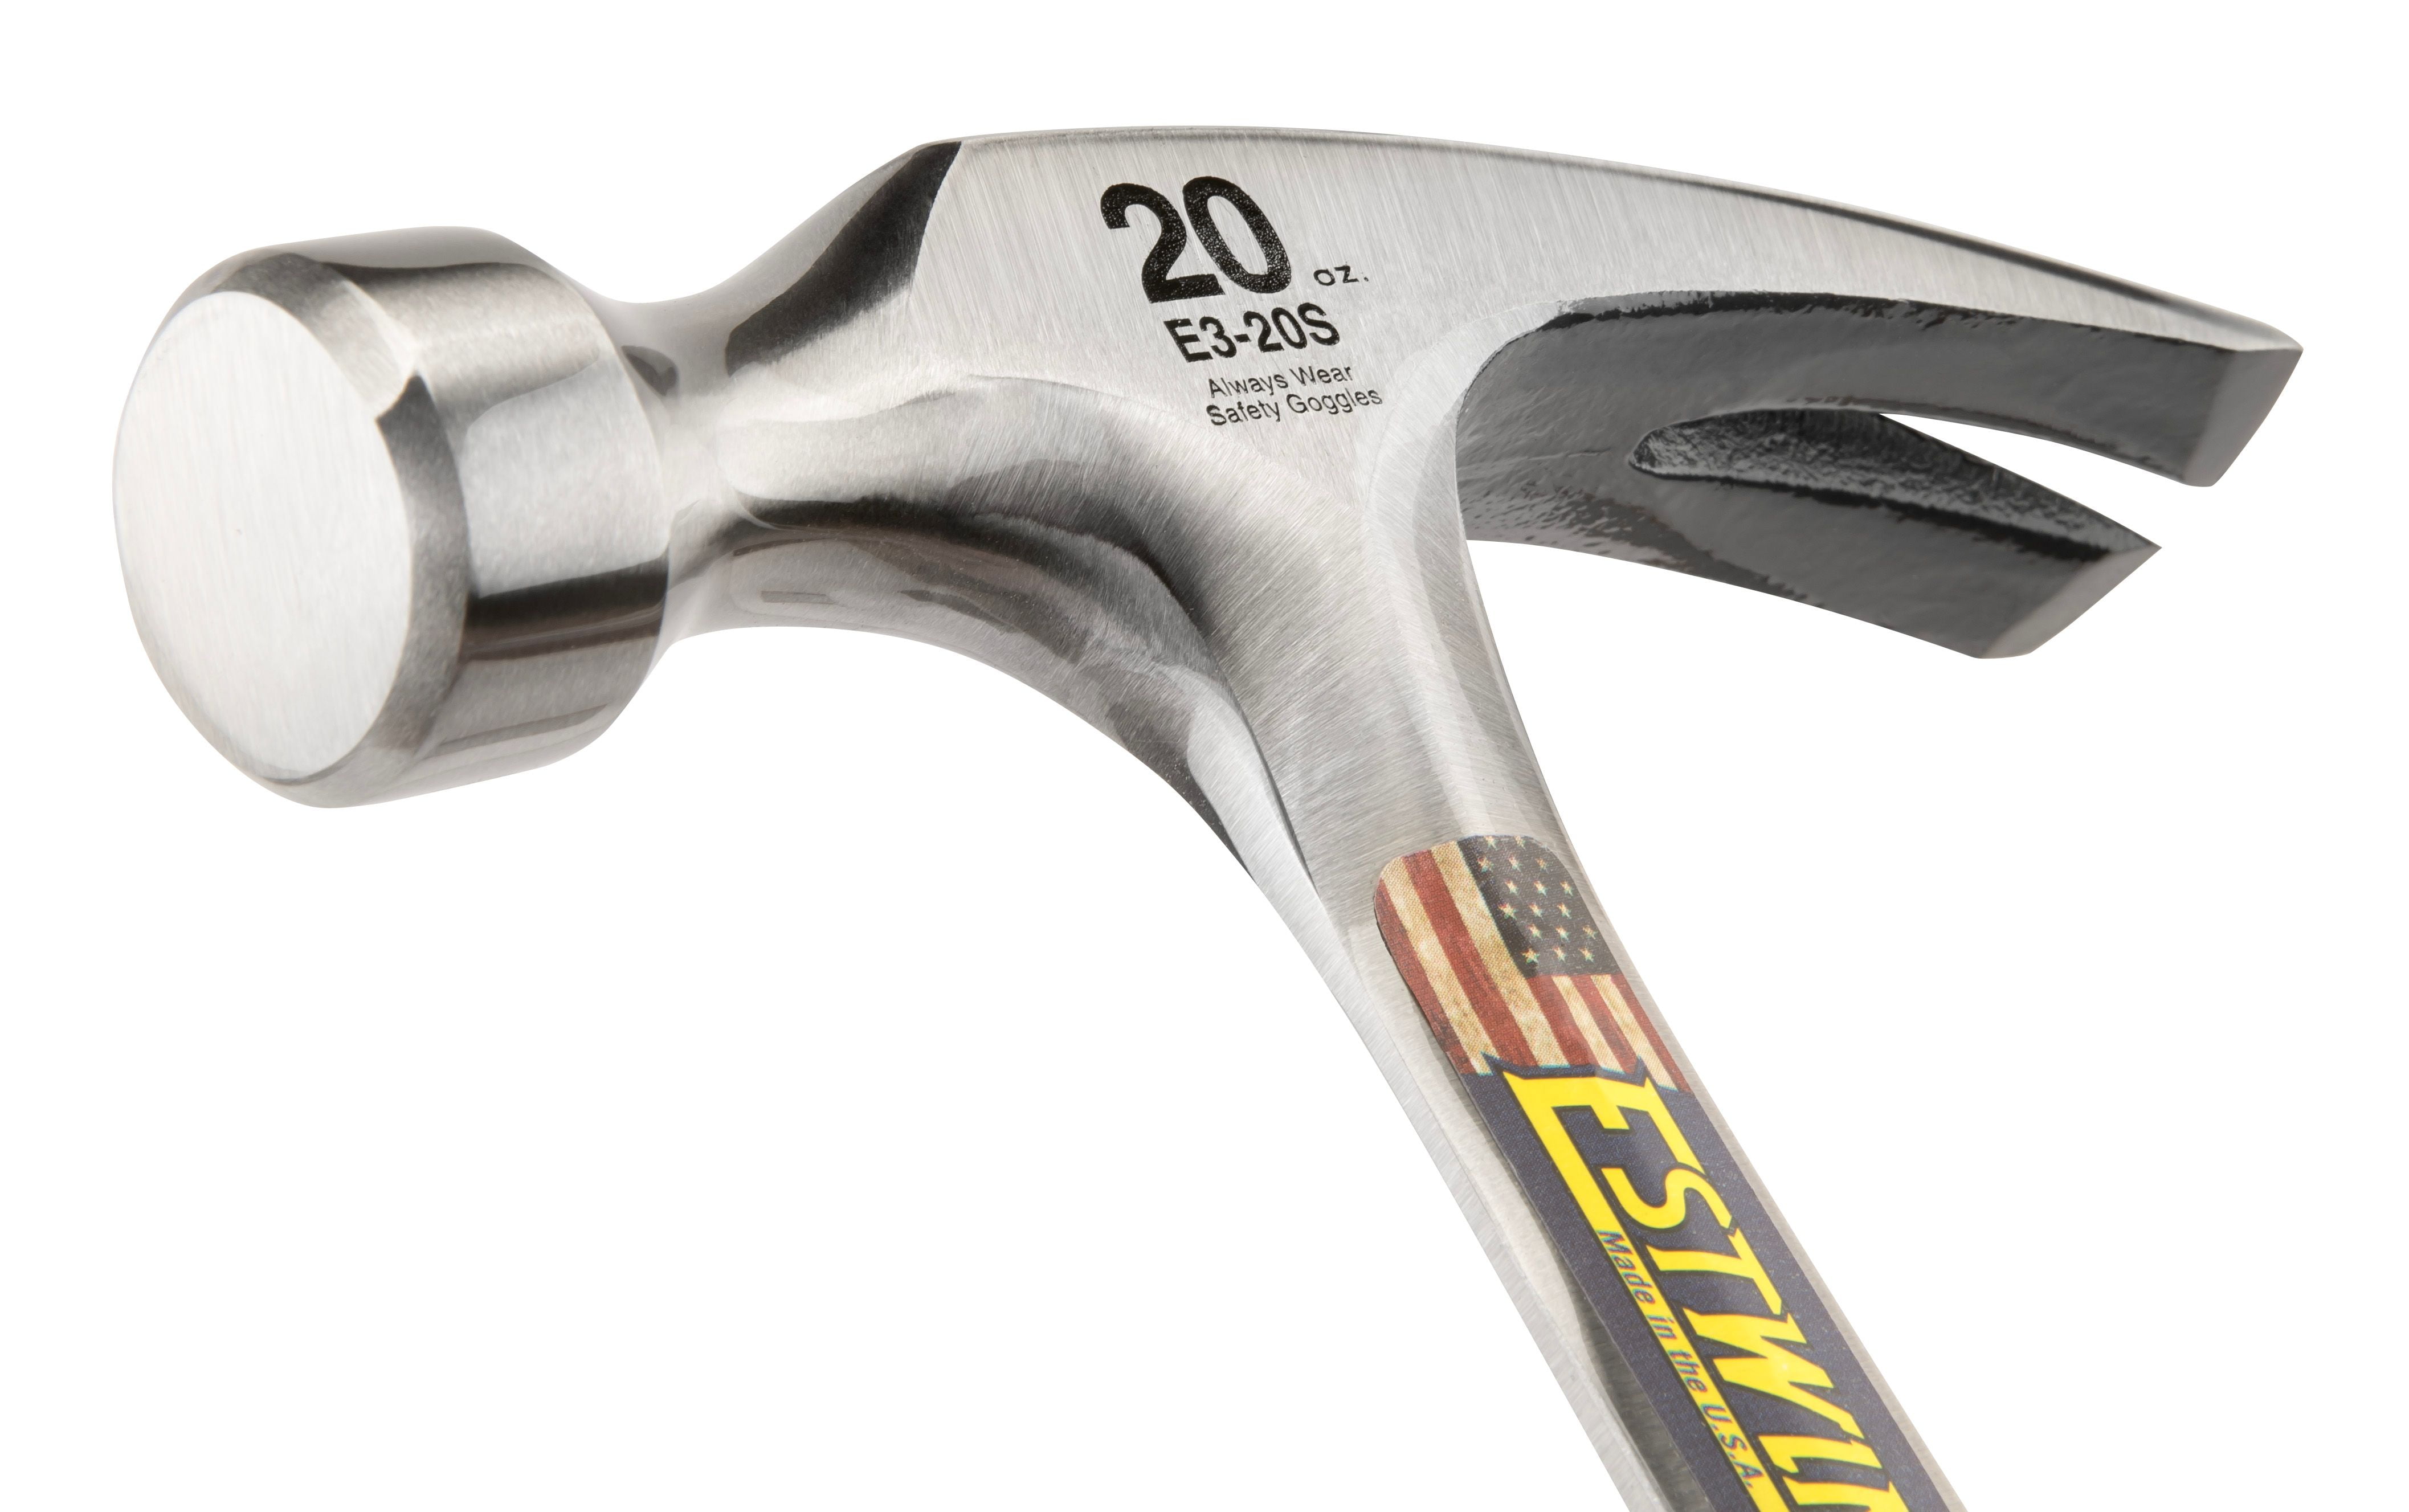 Grizzly T27620 Professional Planishing Hammer